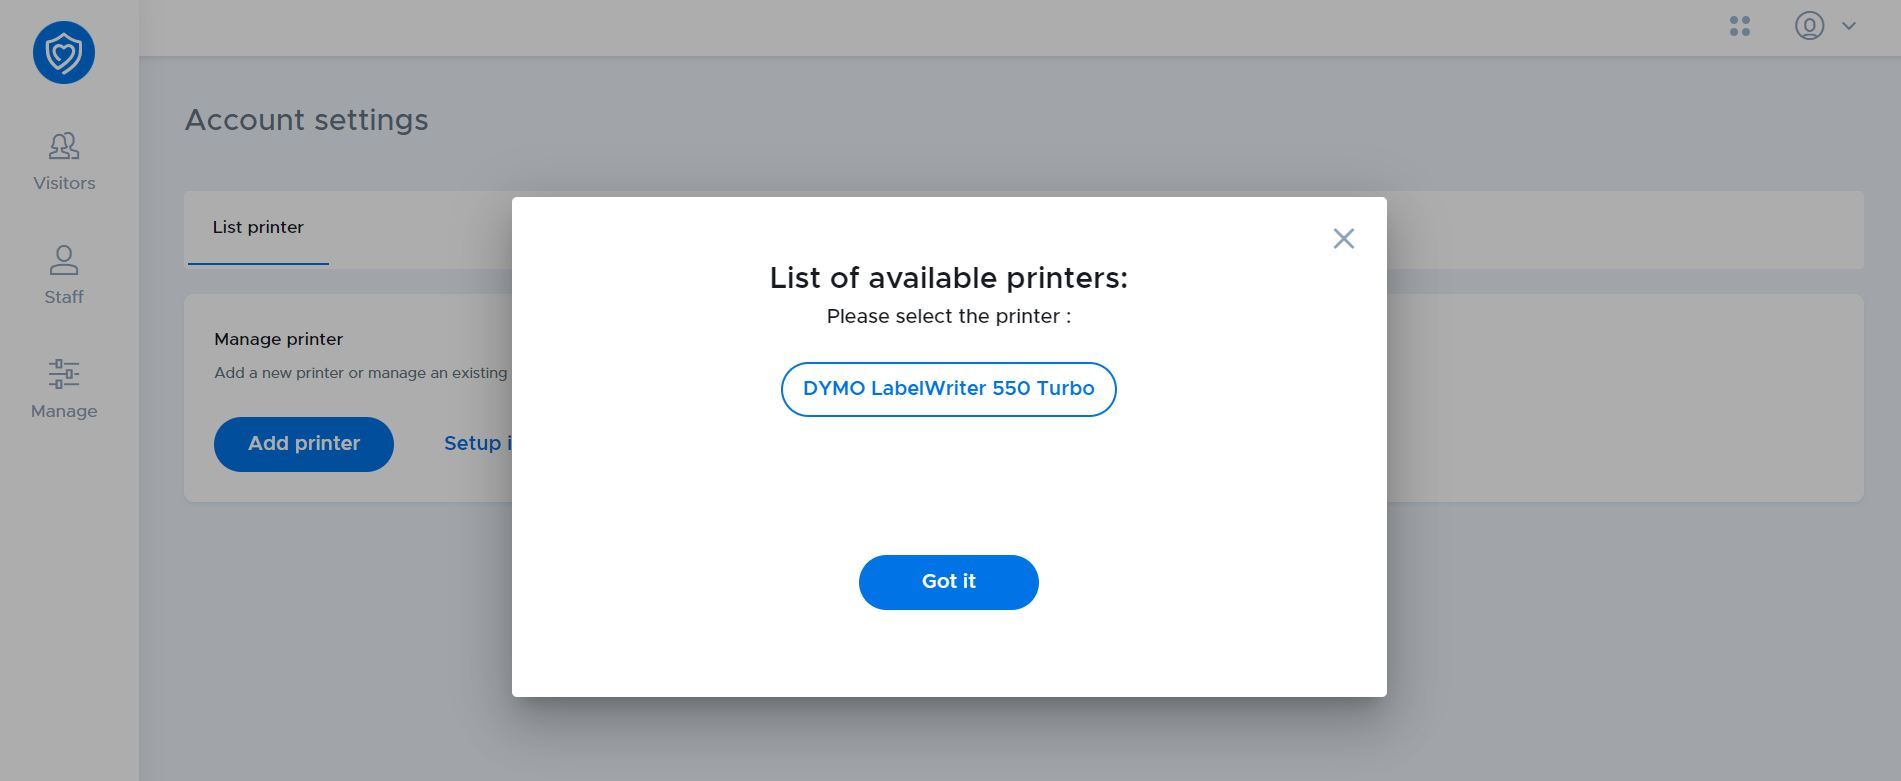 5._Select_printer_from_the_list.JPG